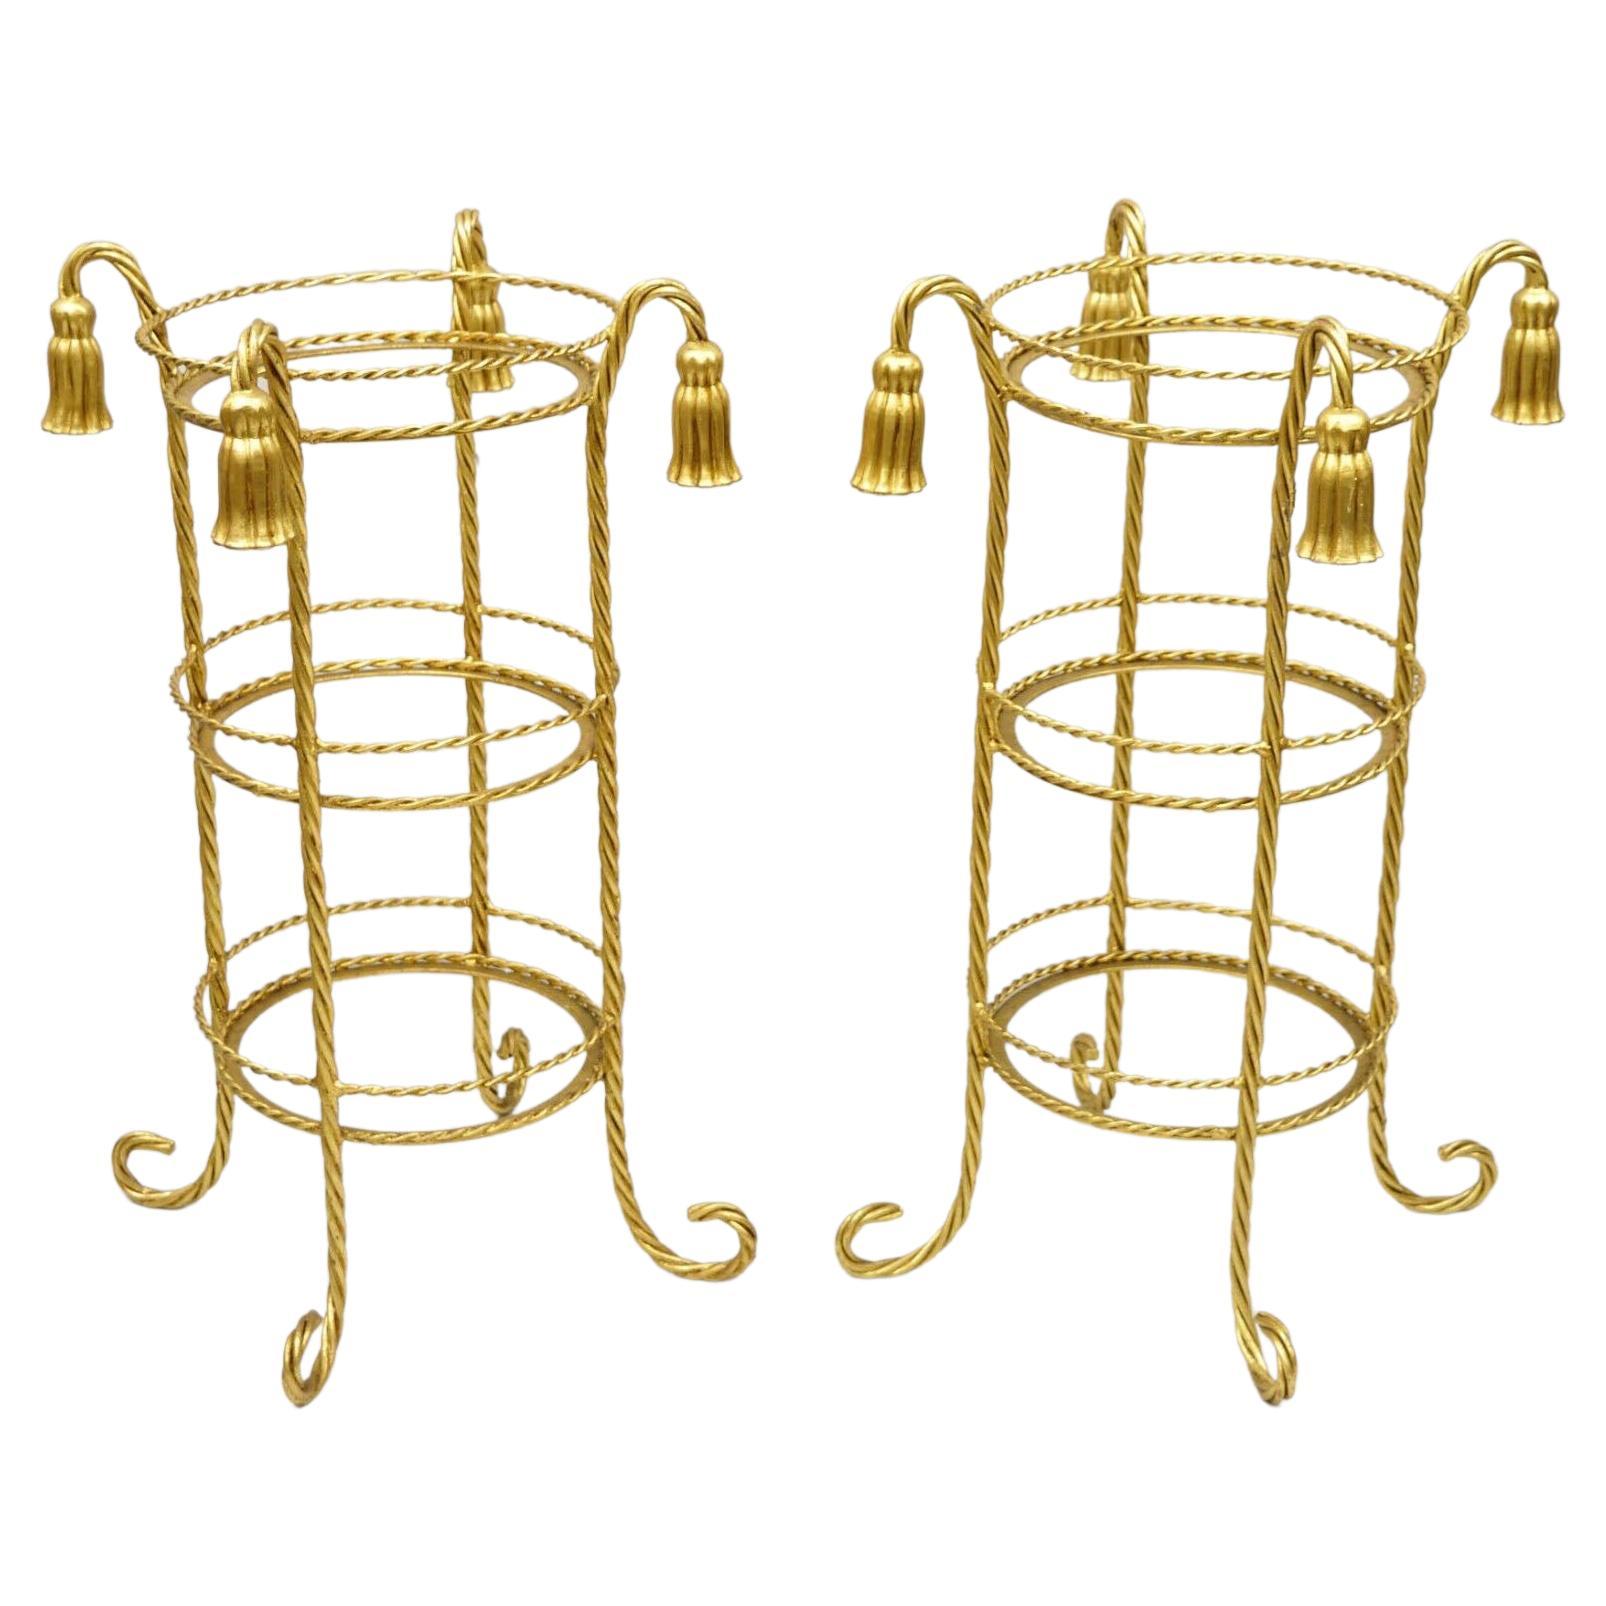 Italian Hollywood Regency 3 Tier Gold Iron Rope Tassel Stand Side Tables, Pair For Sale